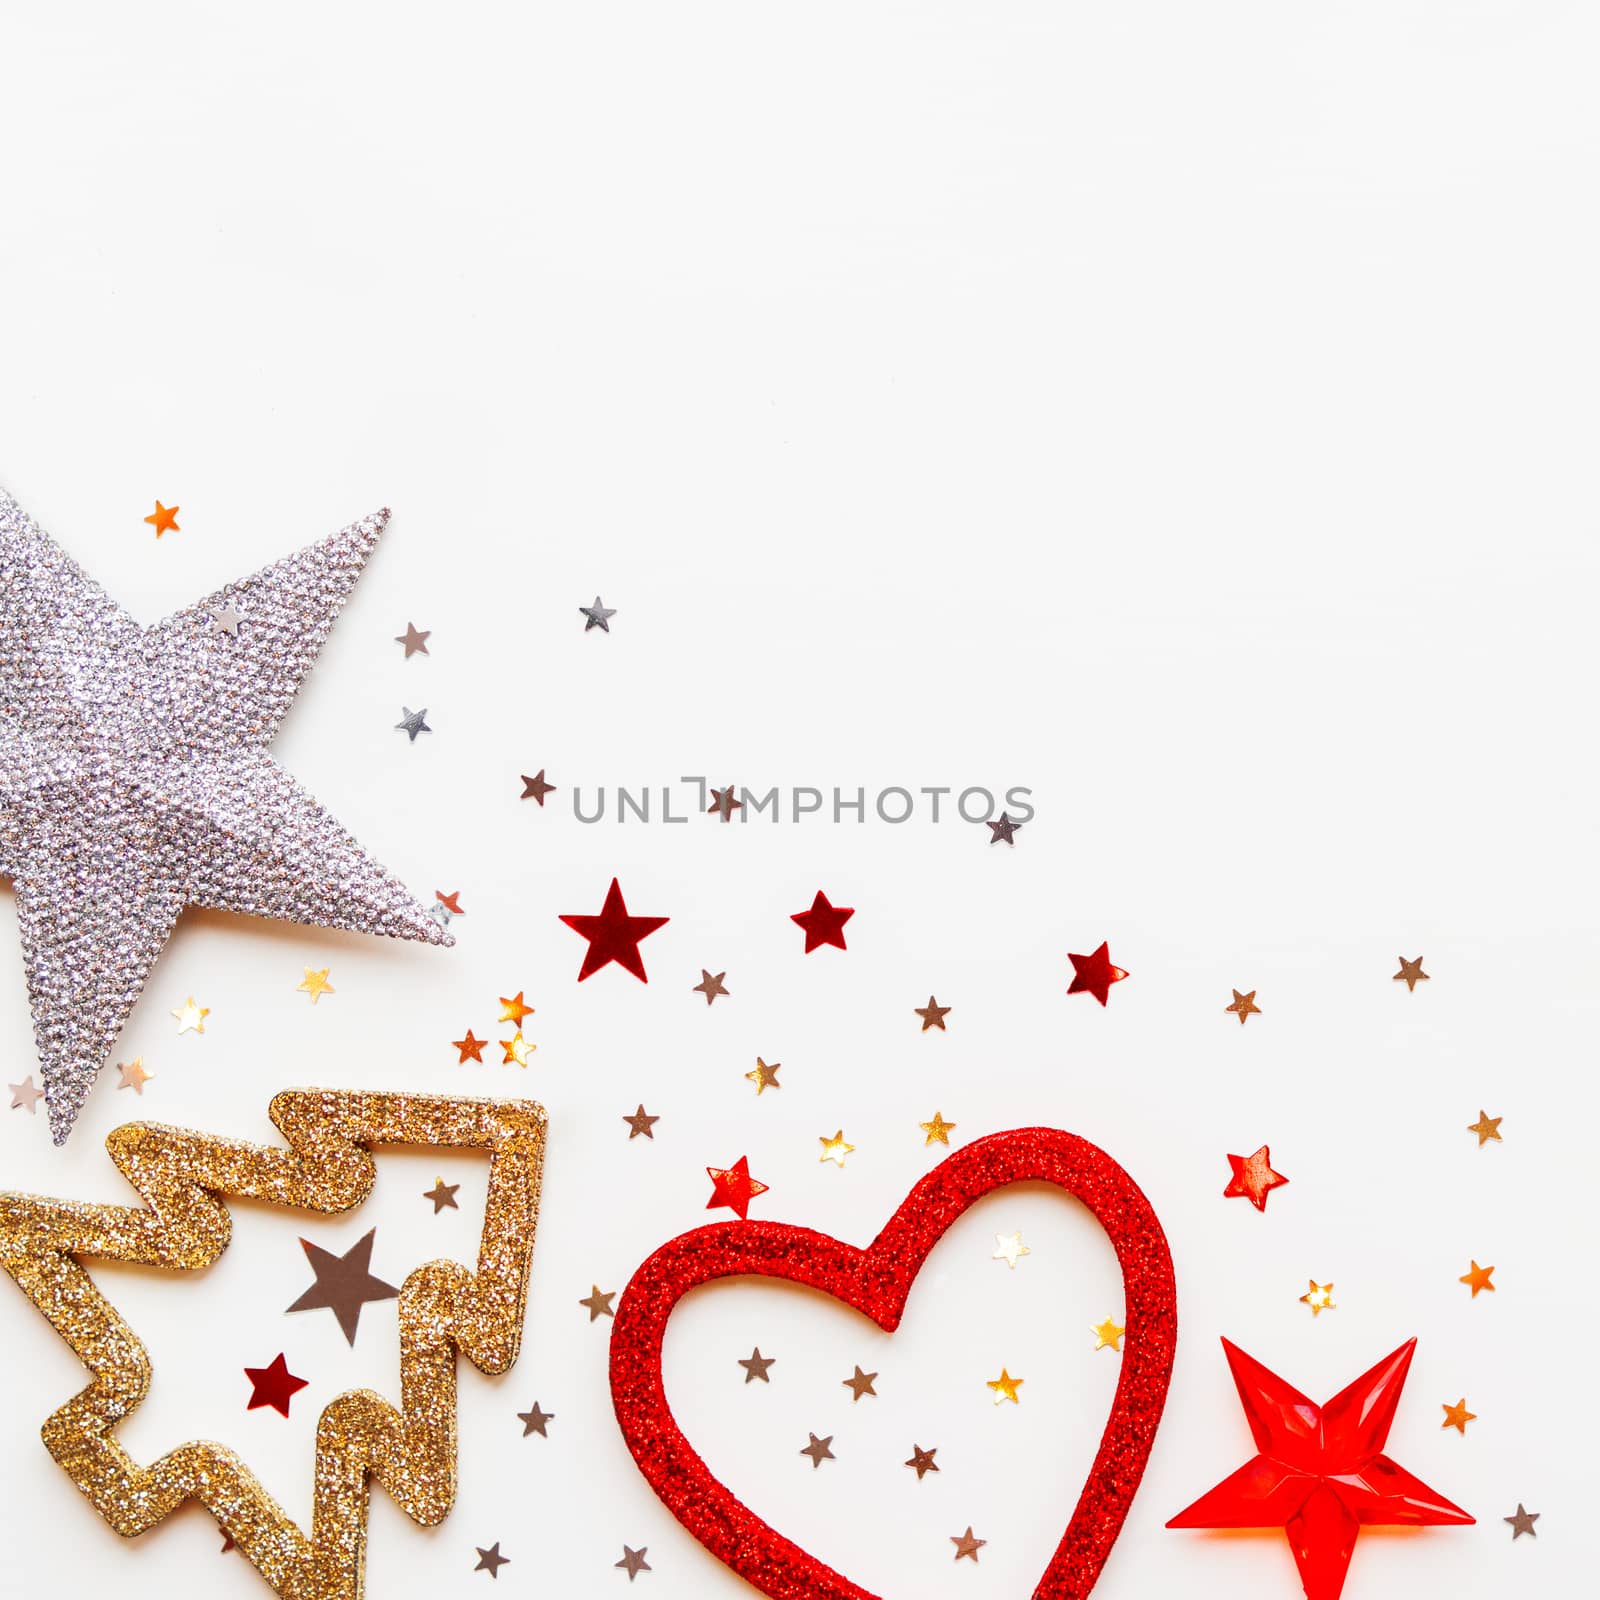 Christmas and New Year background with decorations - shiny stars, balls, snowflakes, heart, confetti.